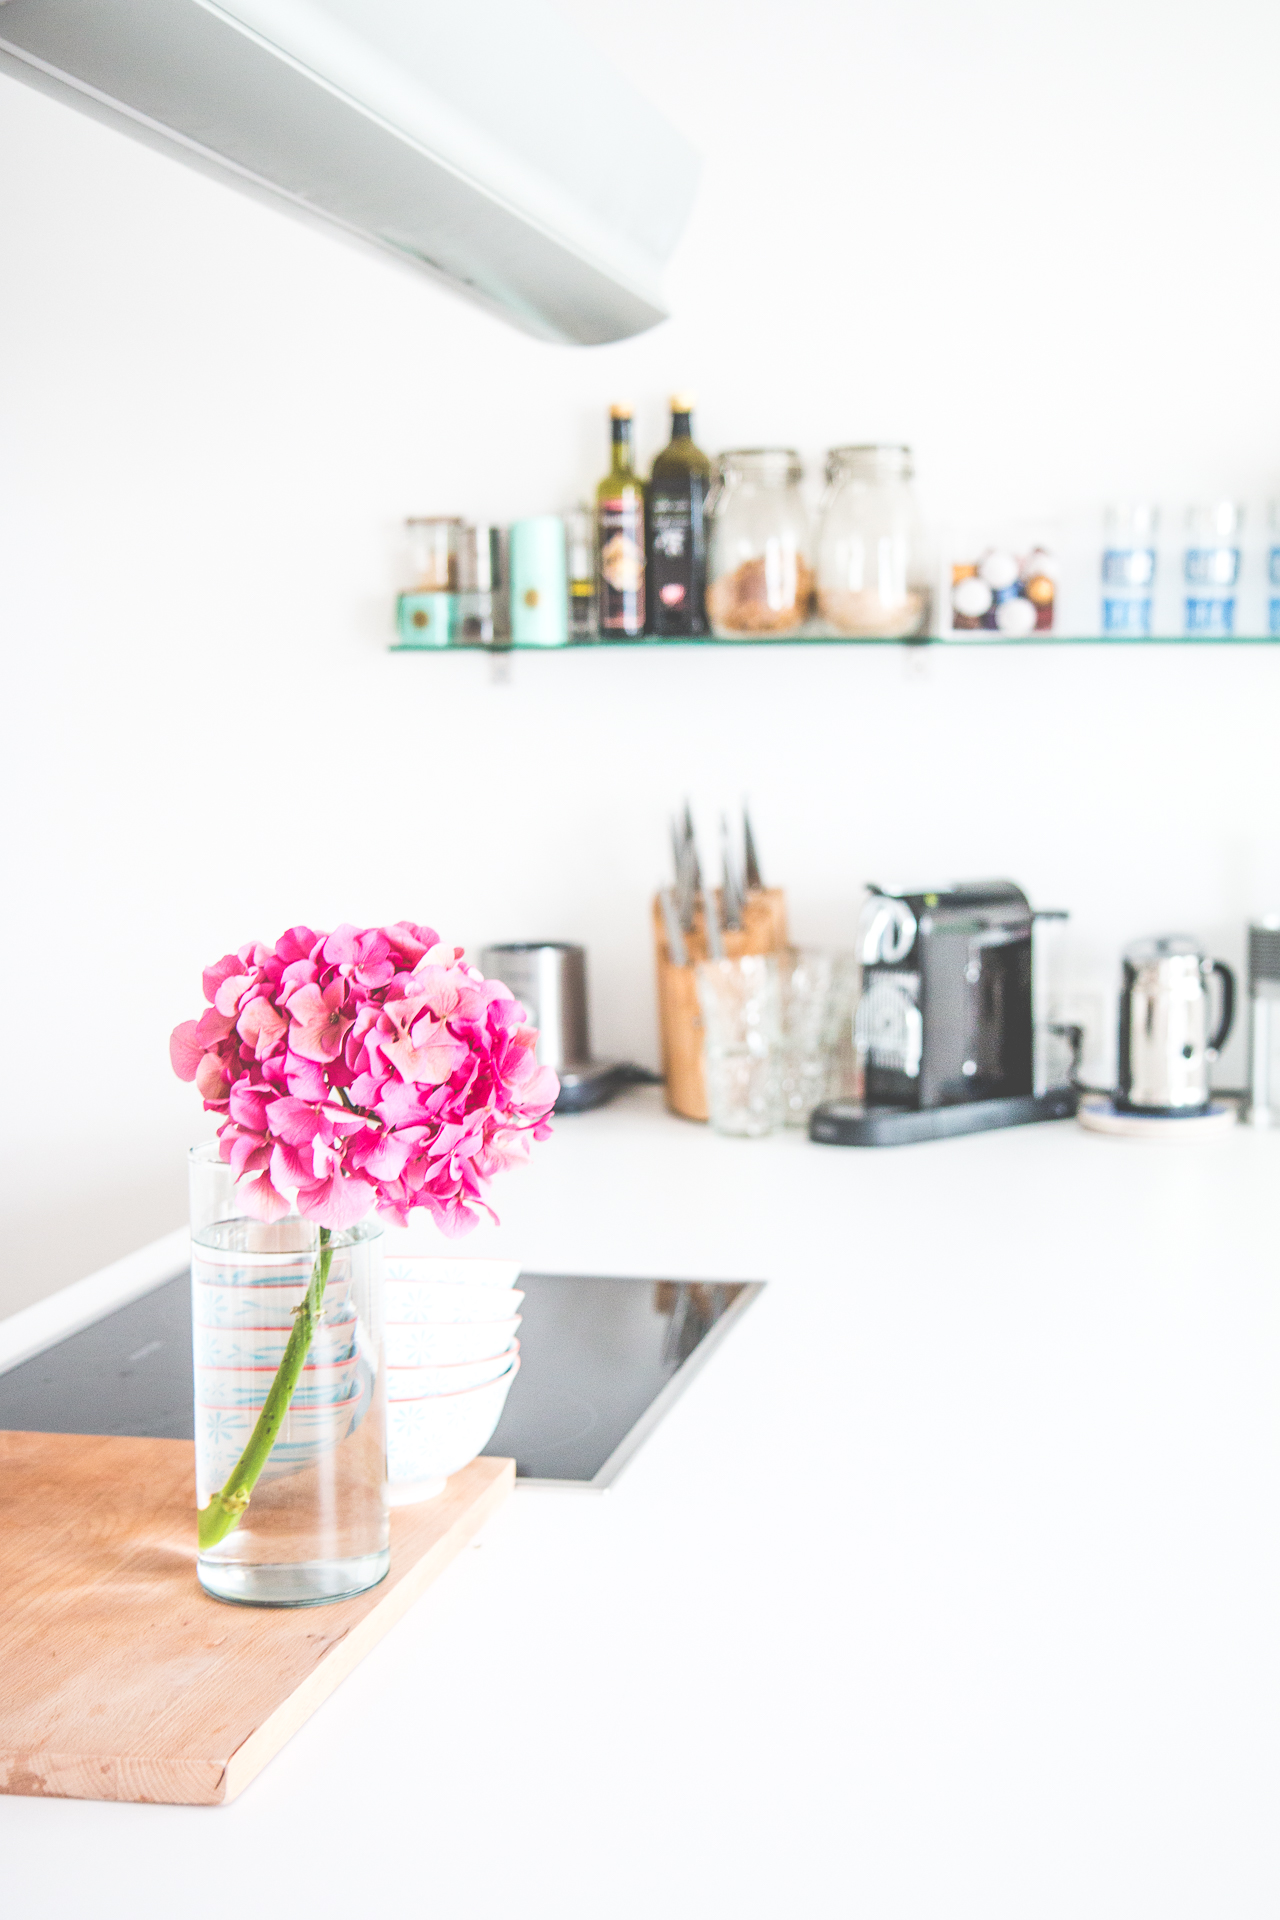 FOR THE HOME: a (white) kitchen affair